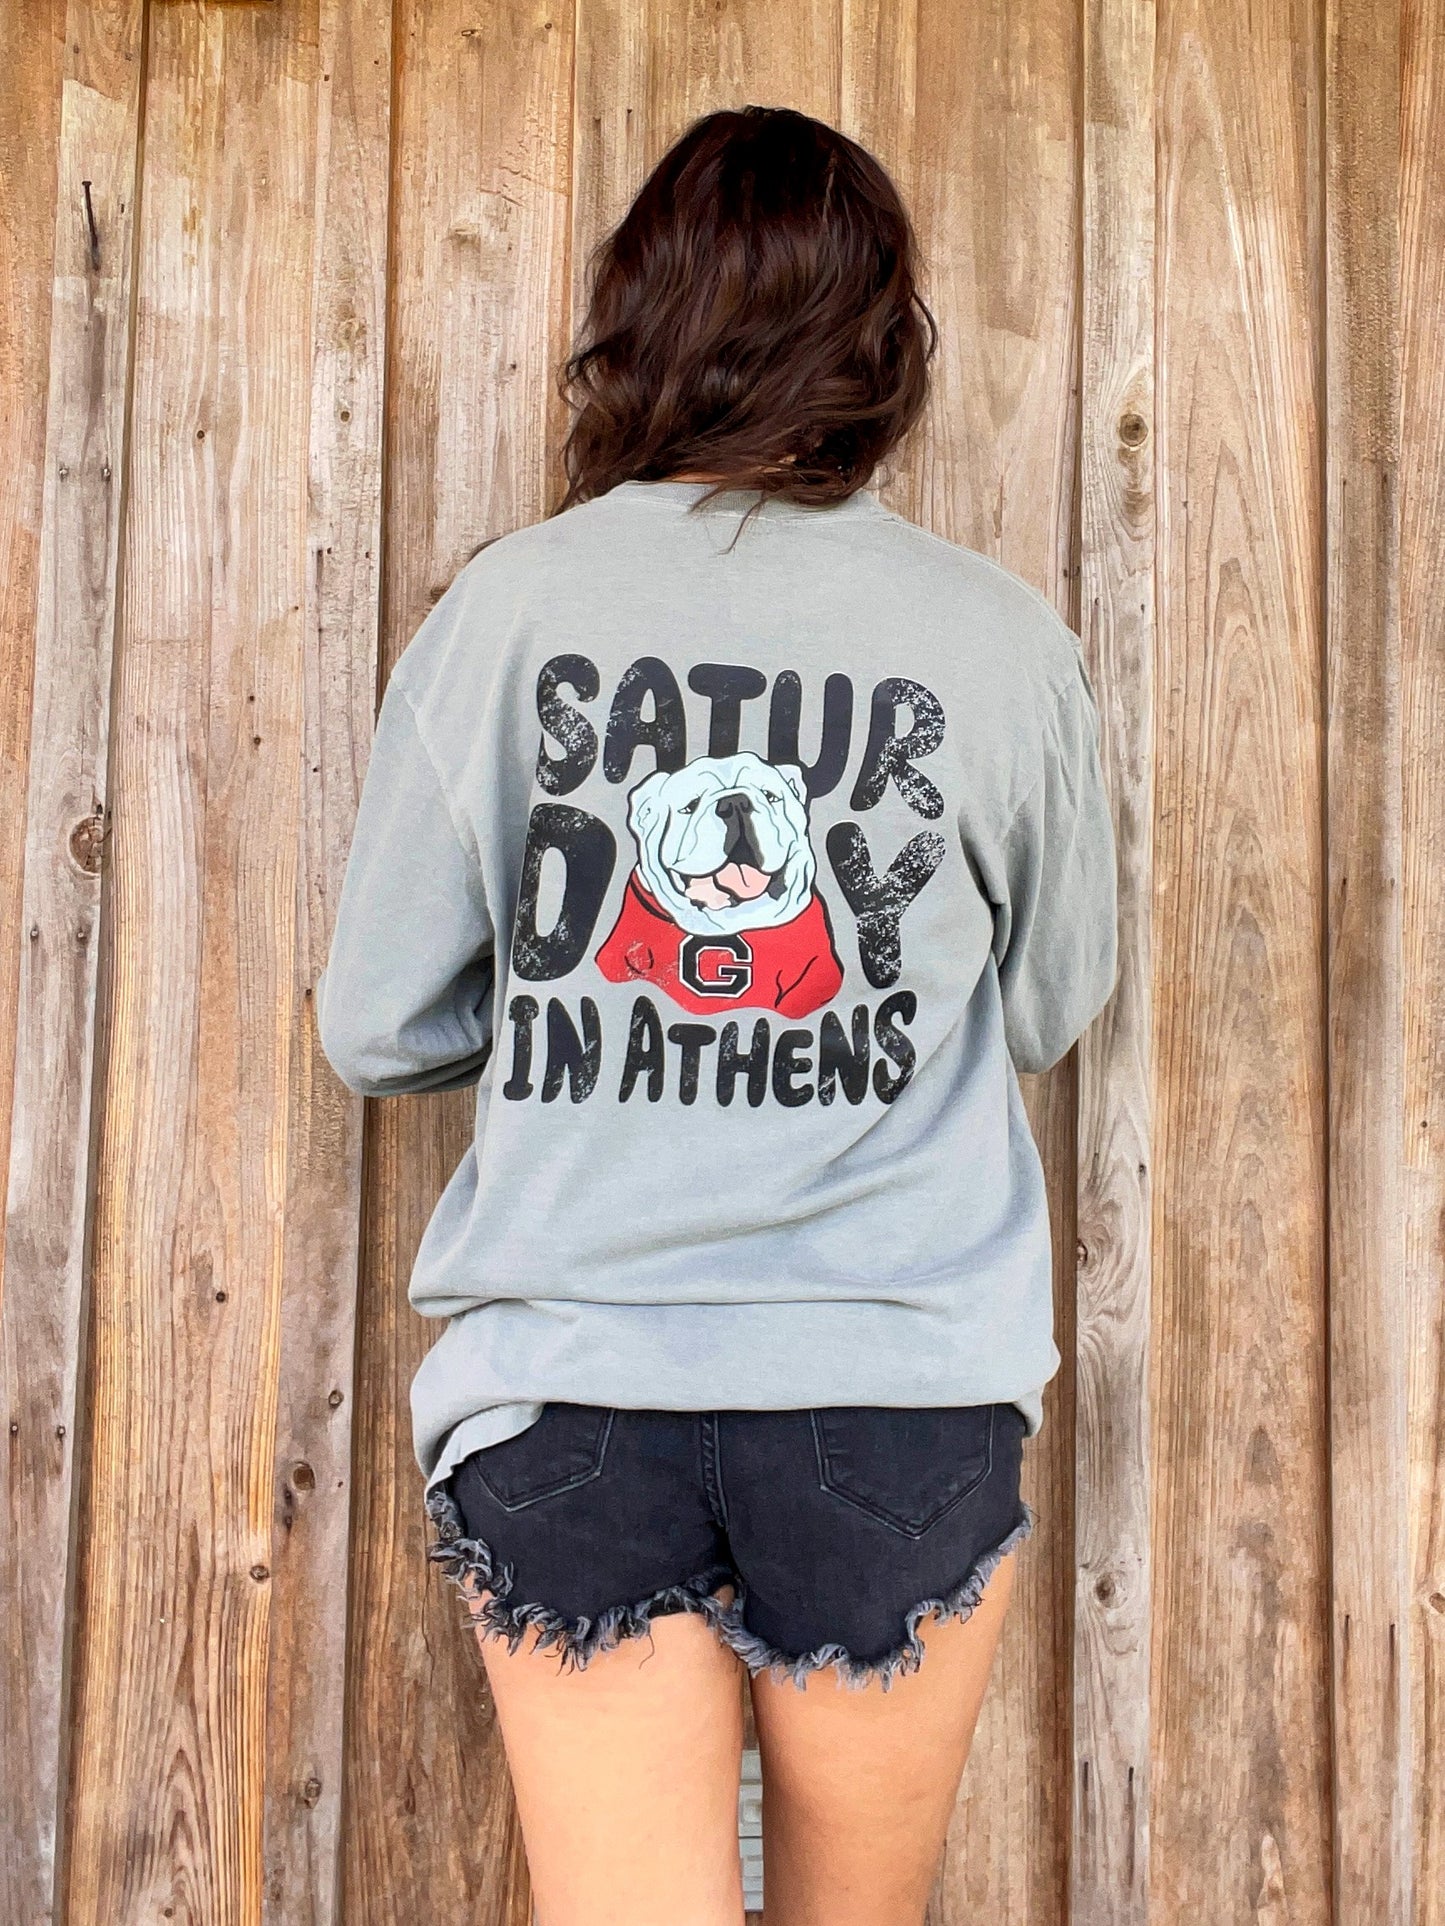 Saturday In Athens Tee - Southern Obsession Co. 